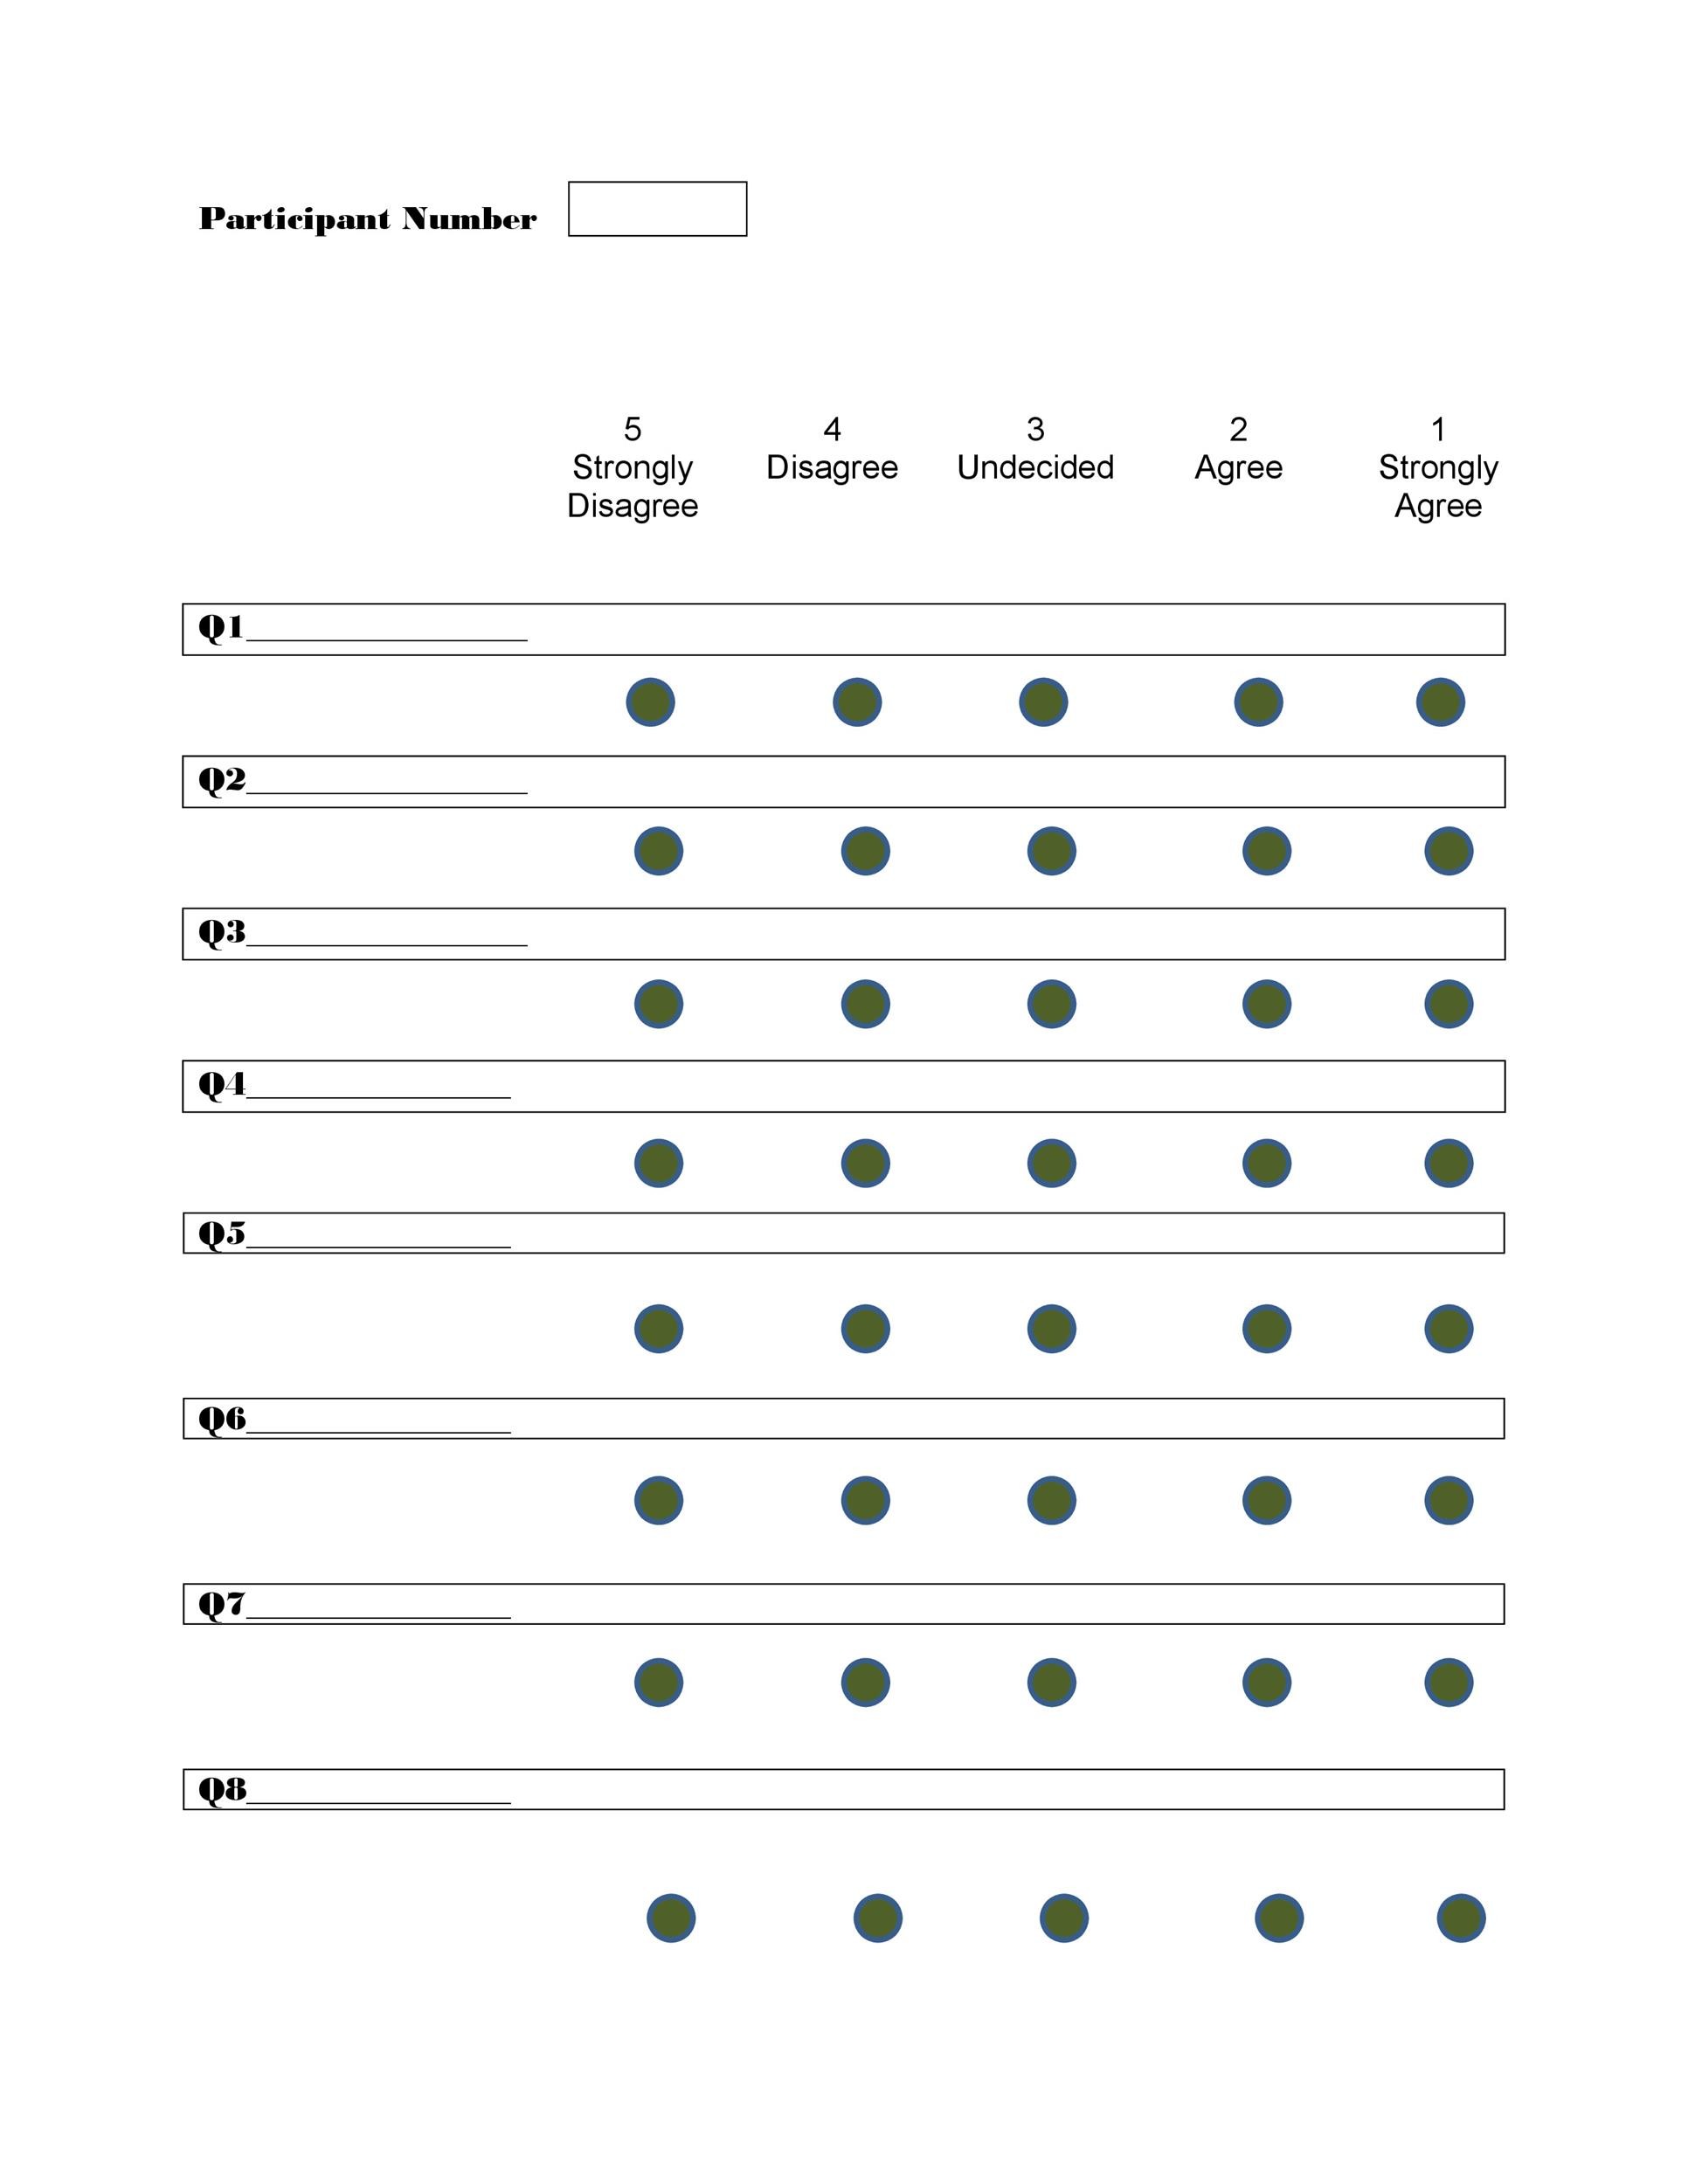 30 Free Likert Scale Templates Examples ᐅ Templatelab